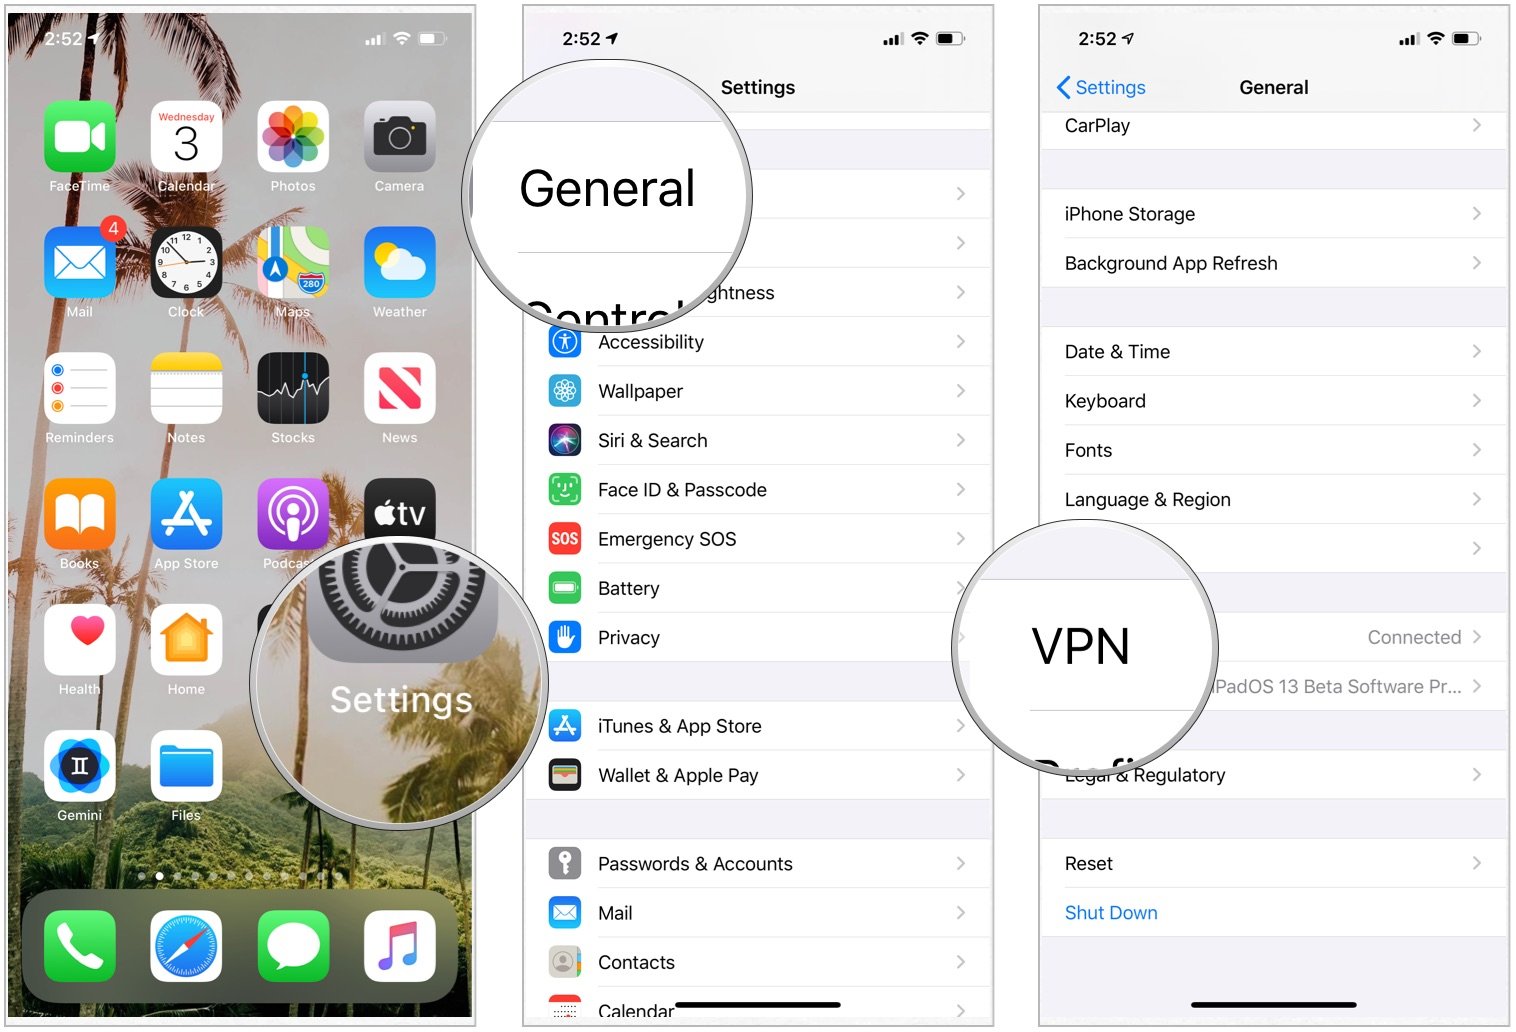 To check the status of your VPN, launch the Settings app on your iPhone, then tap General, and select VPN.